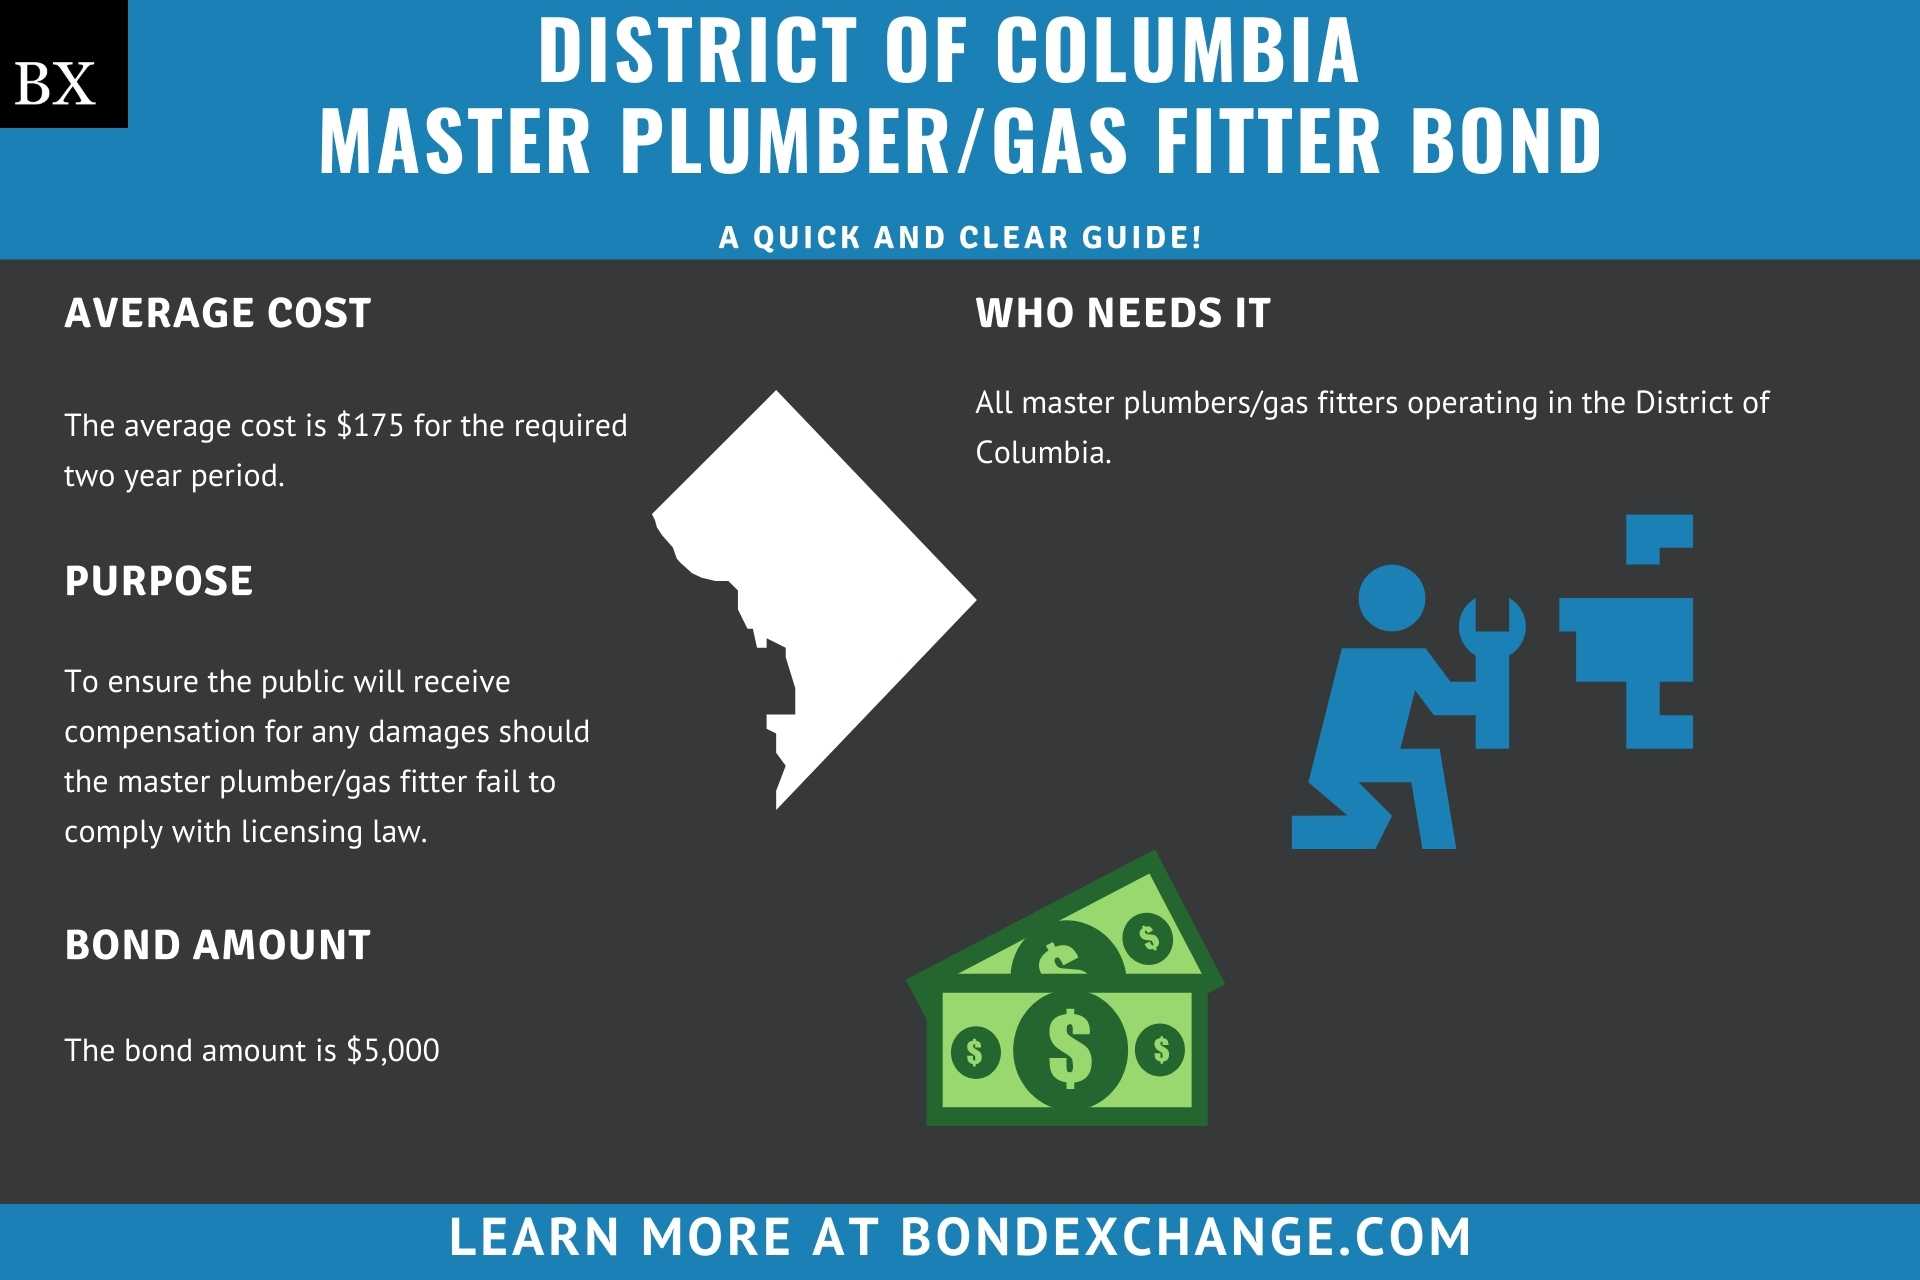 District of Columbia Master Plumber/Gas Fitter Bond